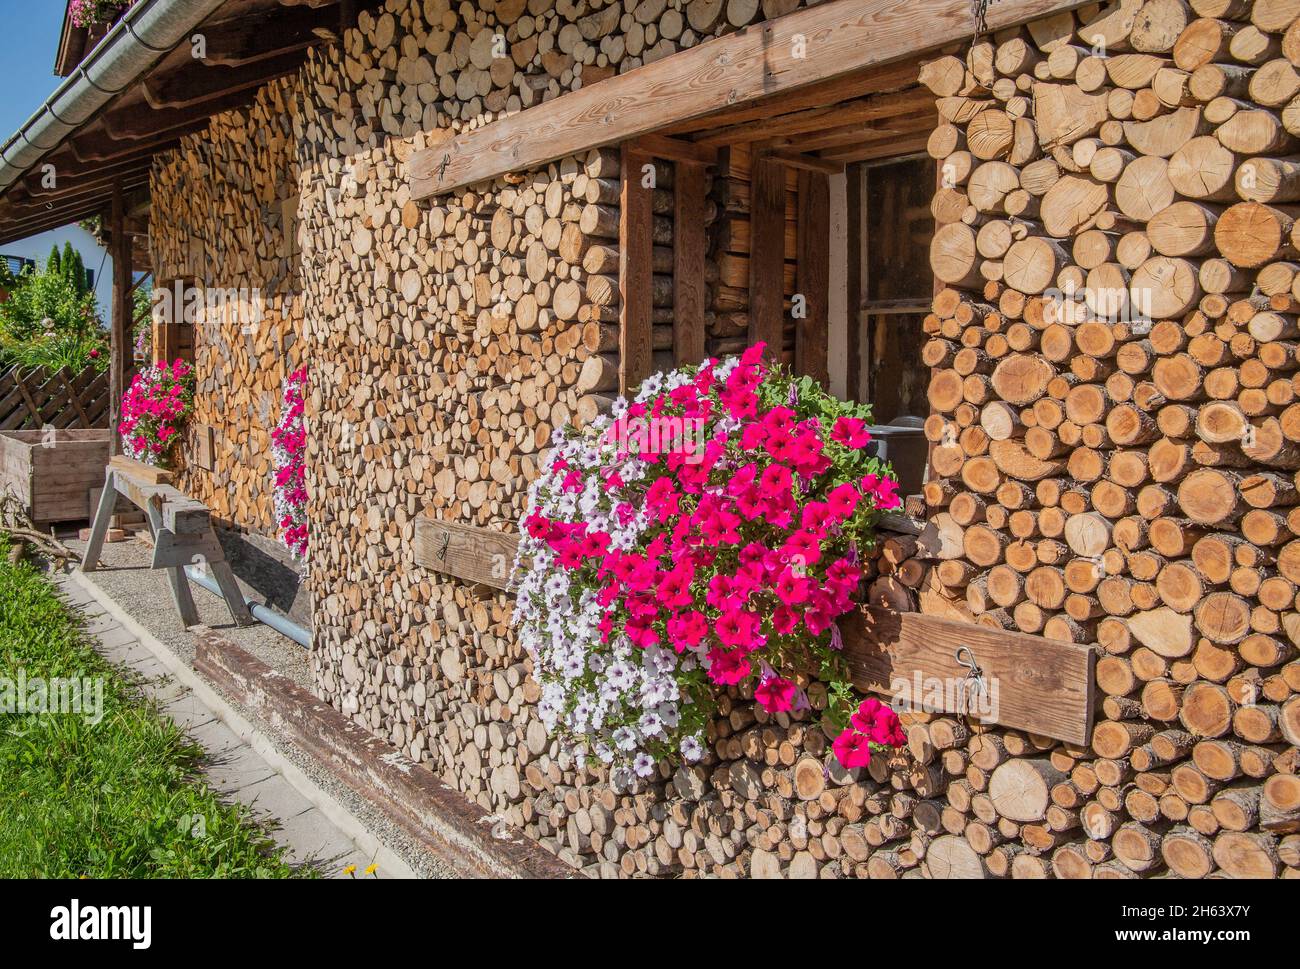 window with flower box on house wall with stacked firewood,ohlstadt,loisachtal,das blaue land,upper bavaria,bavaria,germany Stock Photo